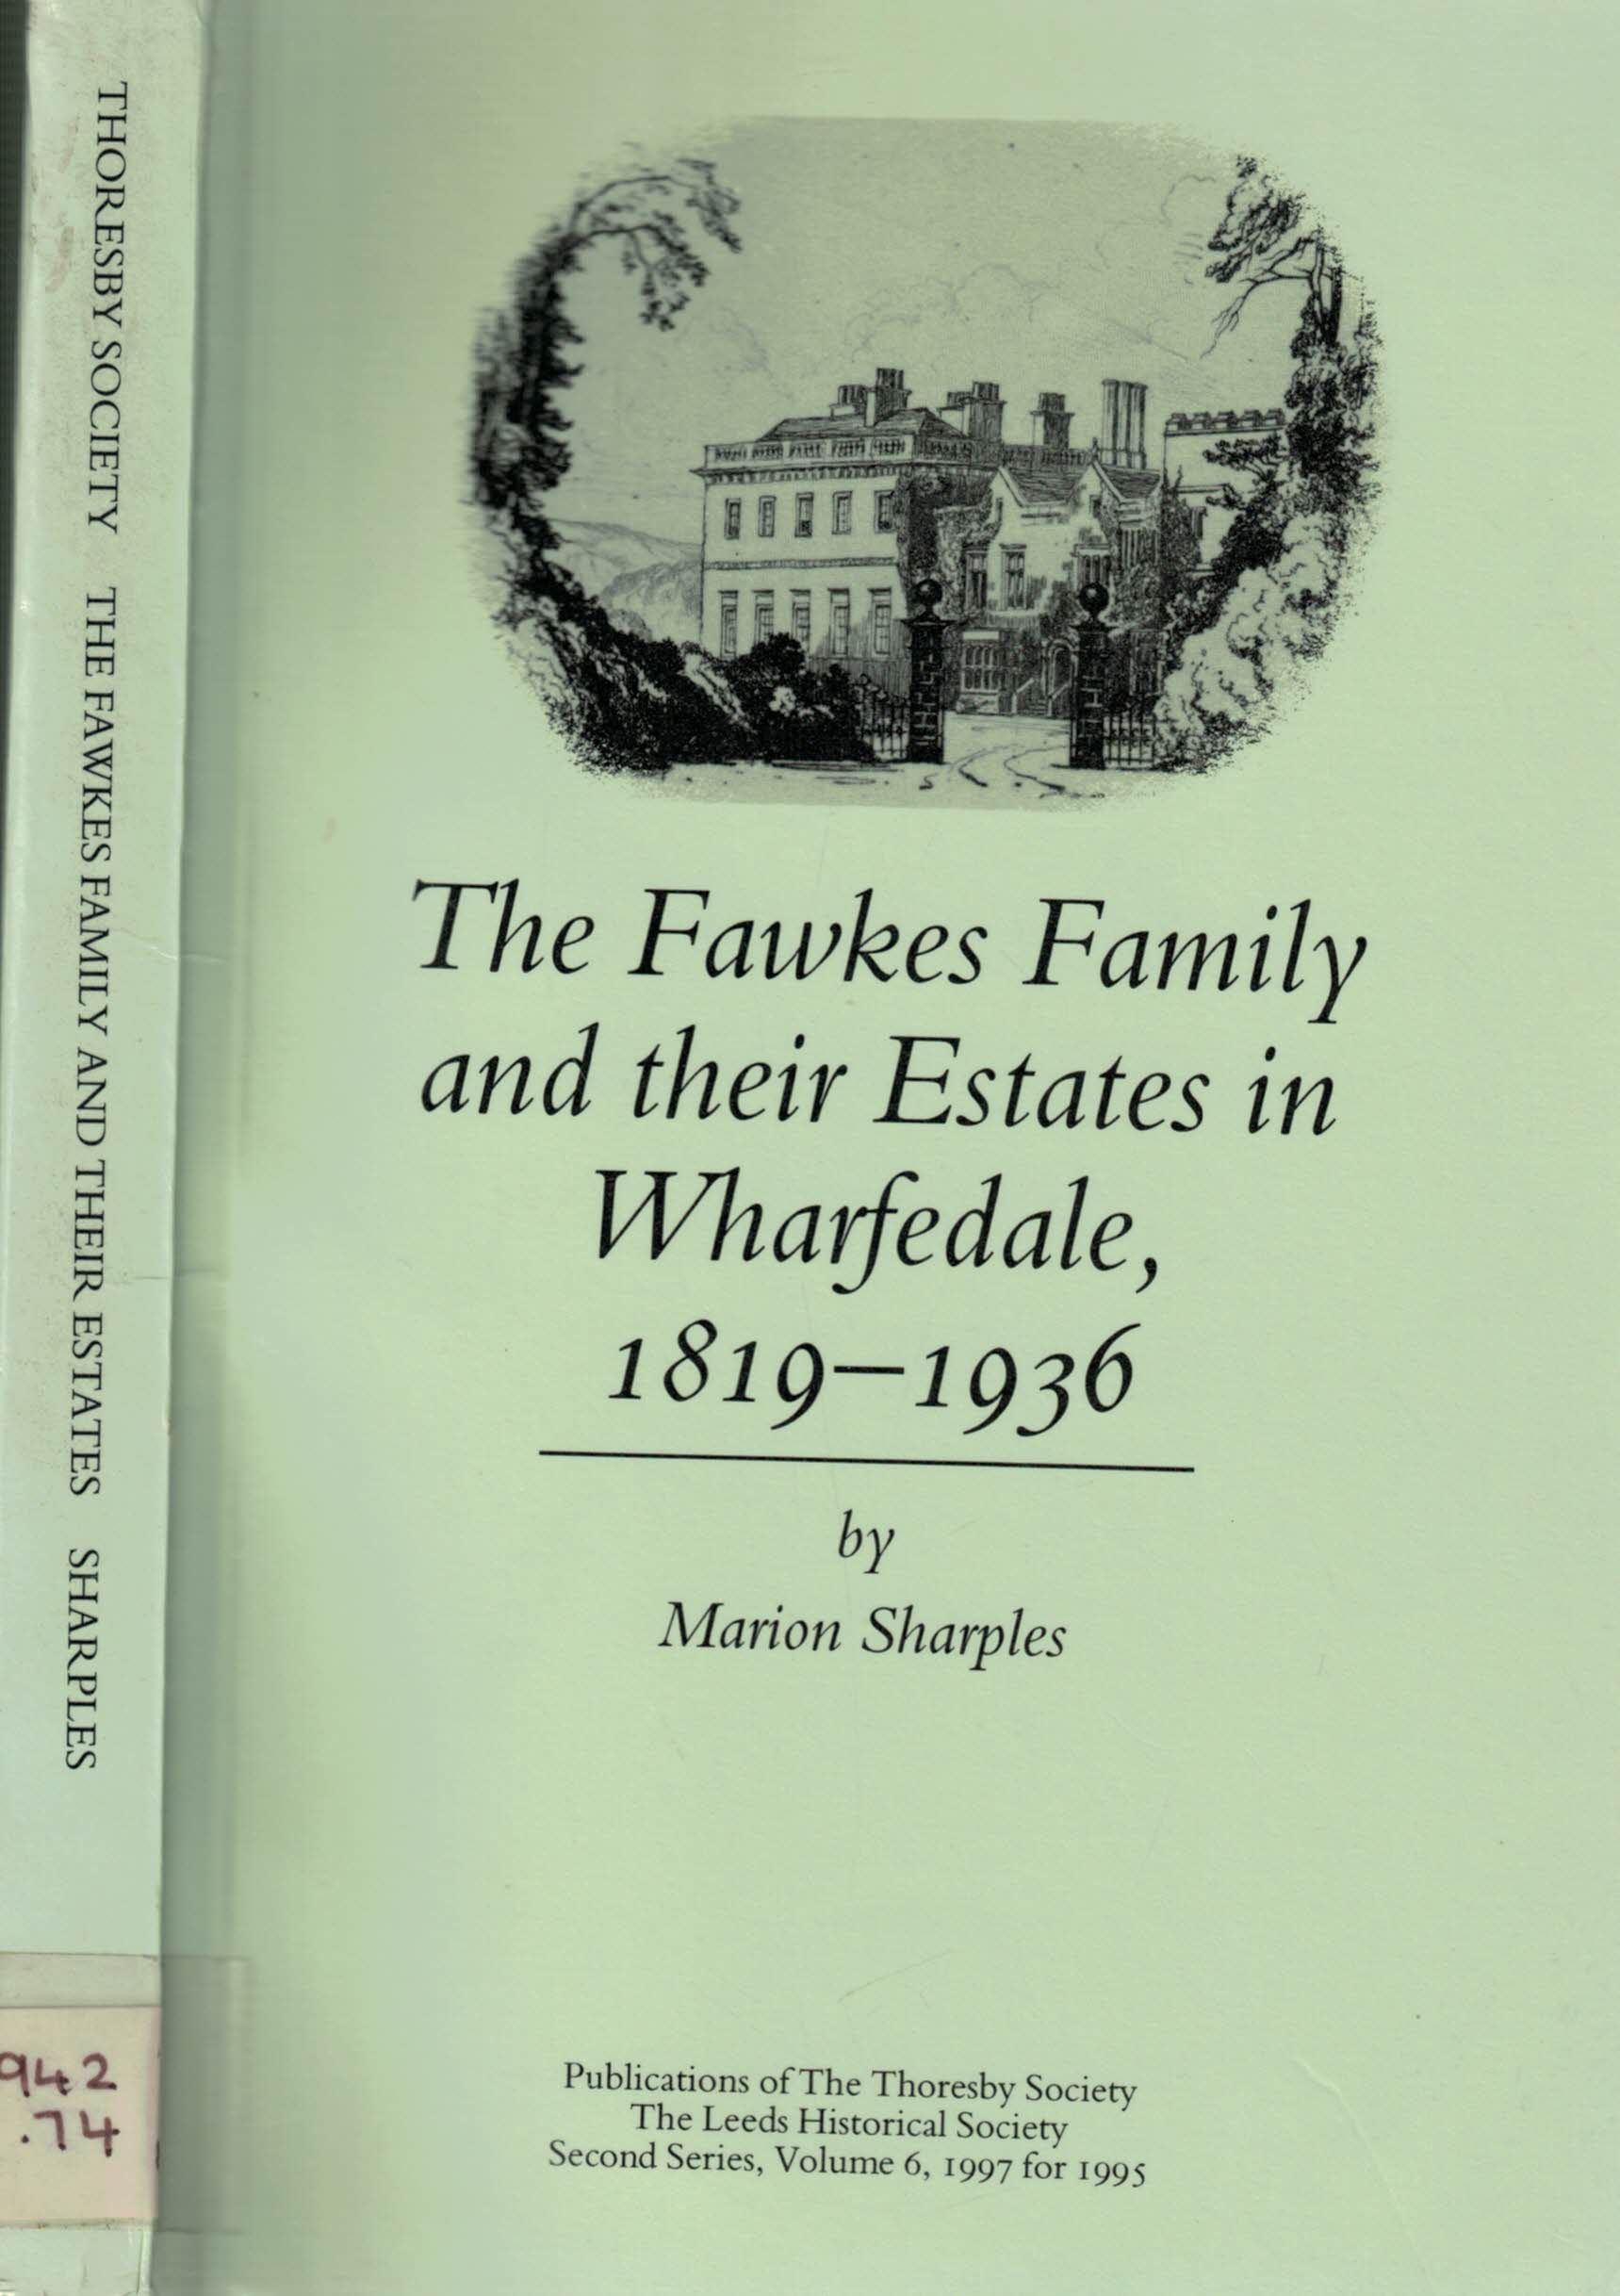 The Fawkes Family and Their Estates in Wharfedale, 1819-1936. The Publications of the Thoresby Society. Second Series. Volume 6. 1995.